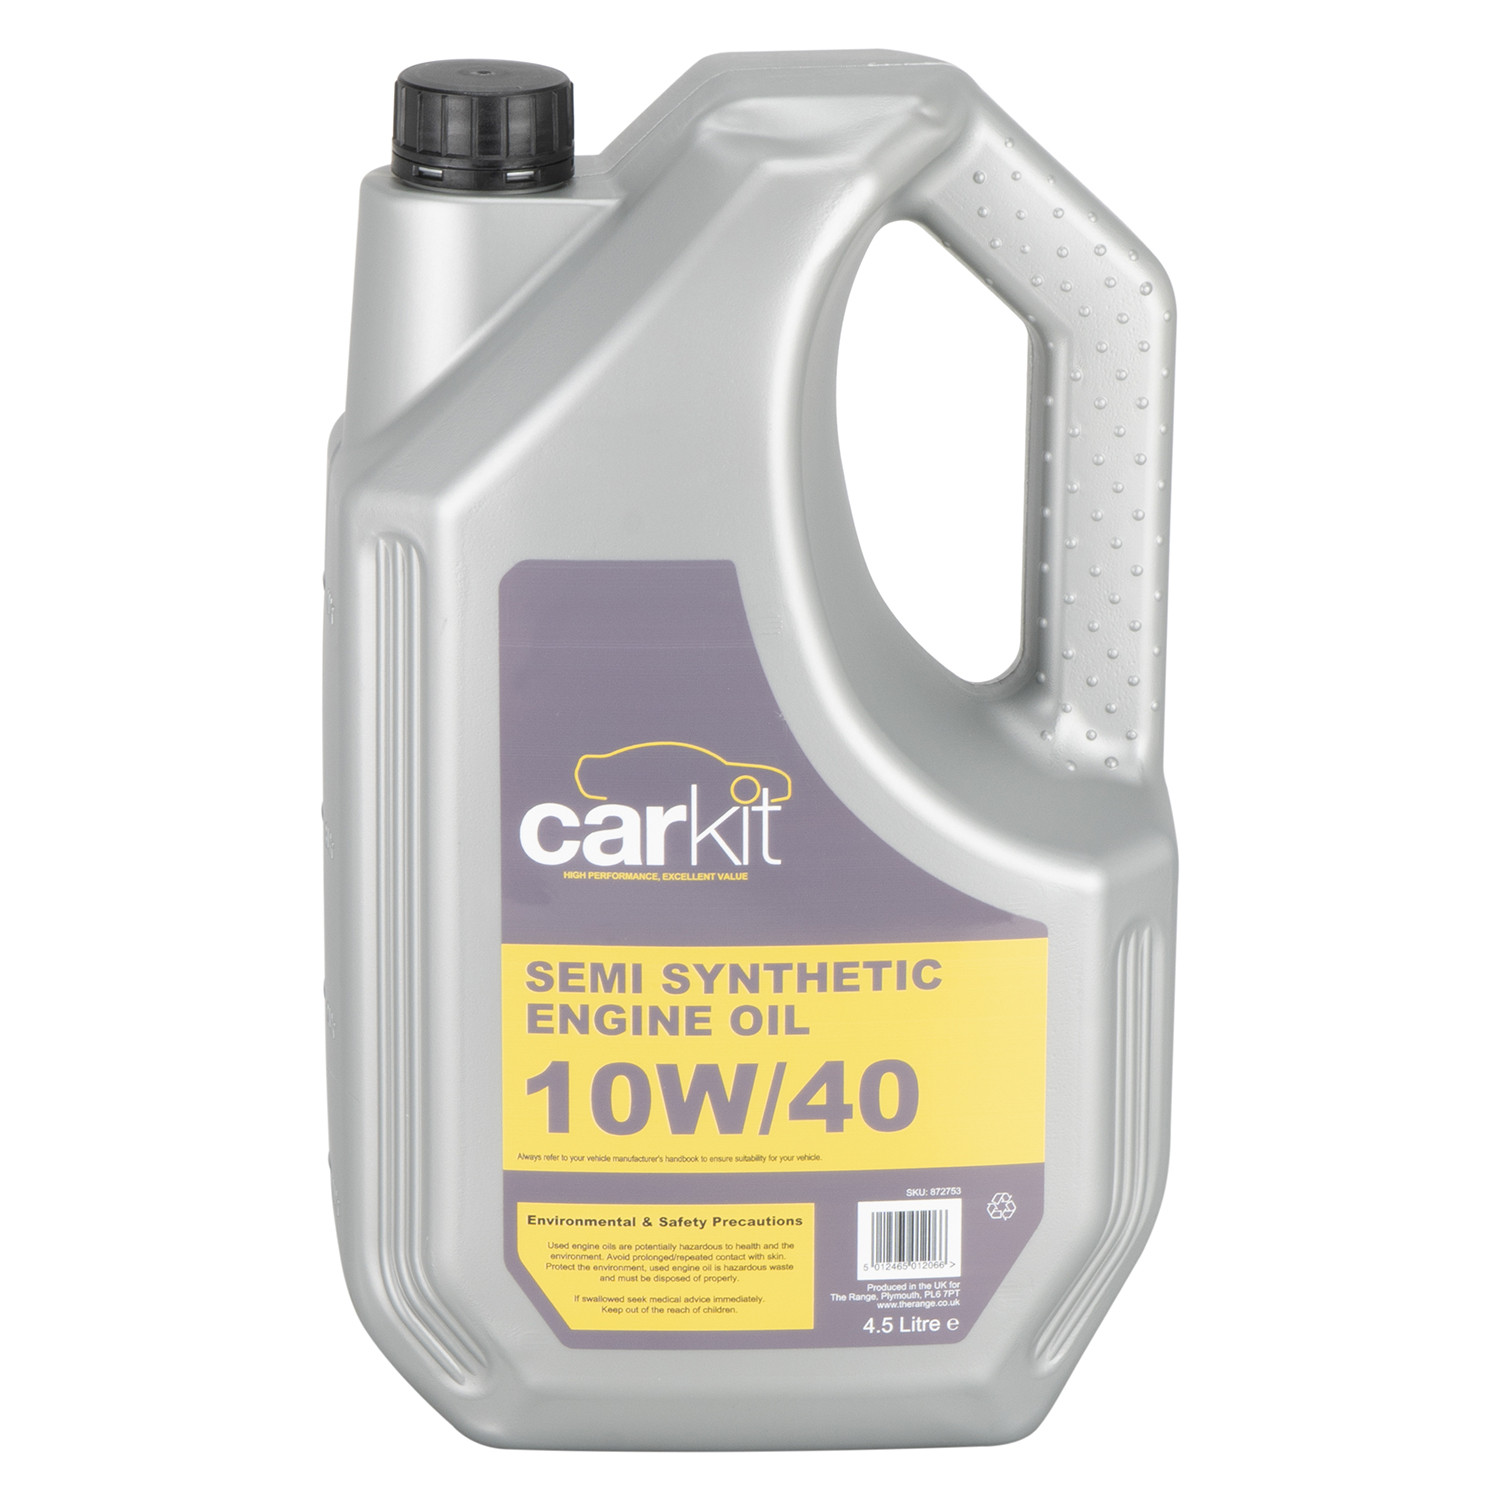 Carkit 10W/40 Semi Synthetic Engine Oil Image